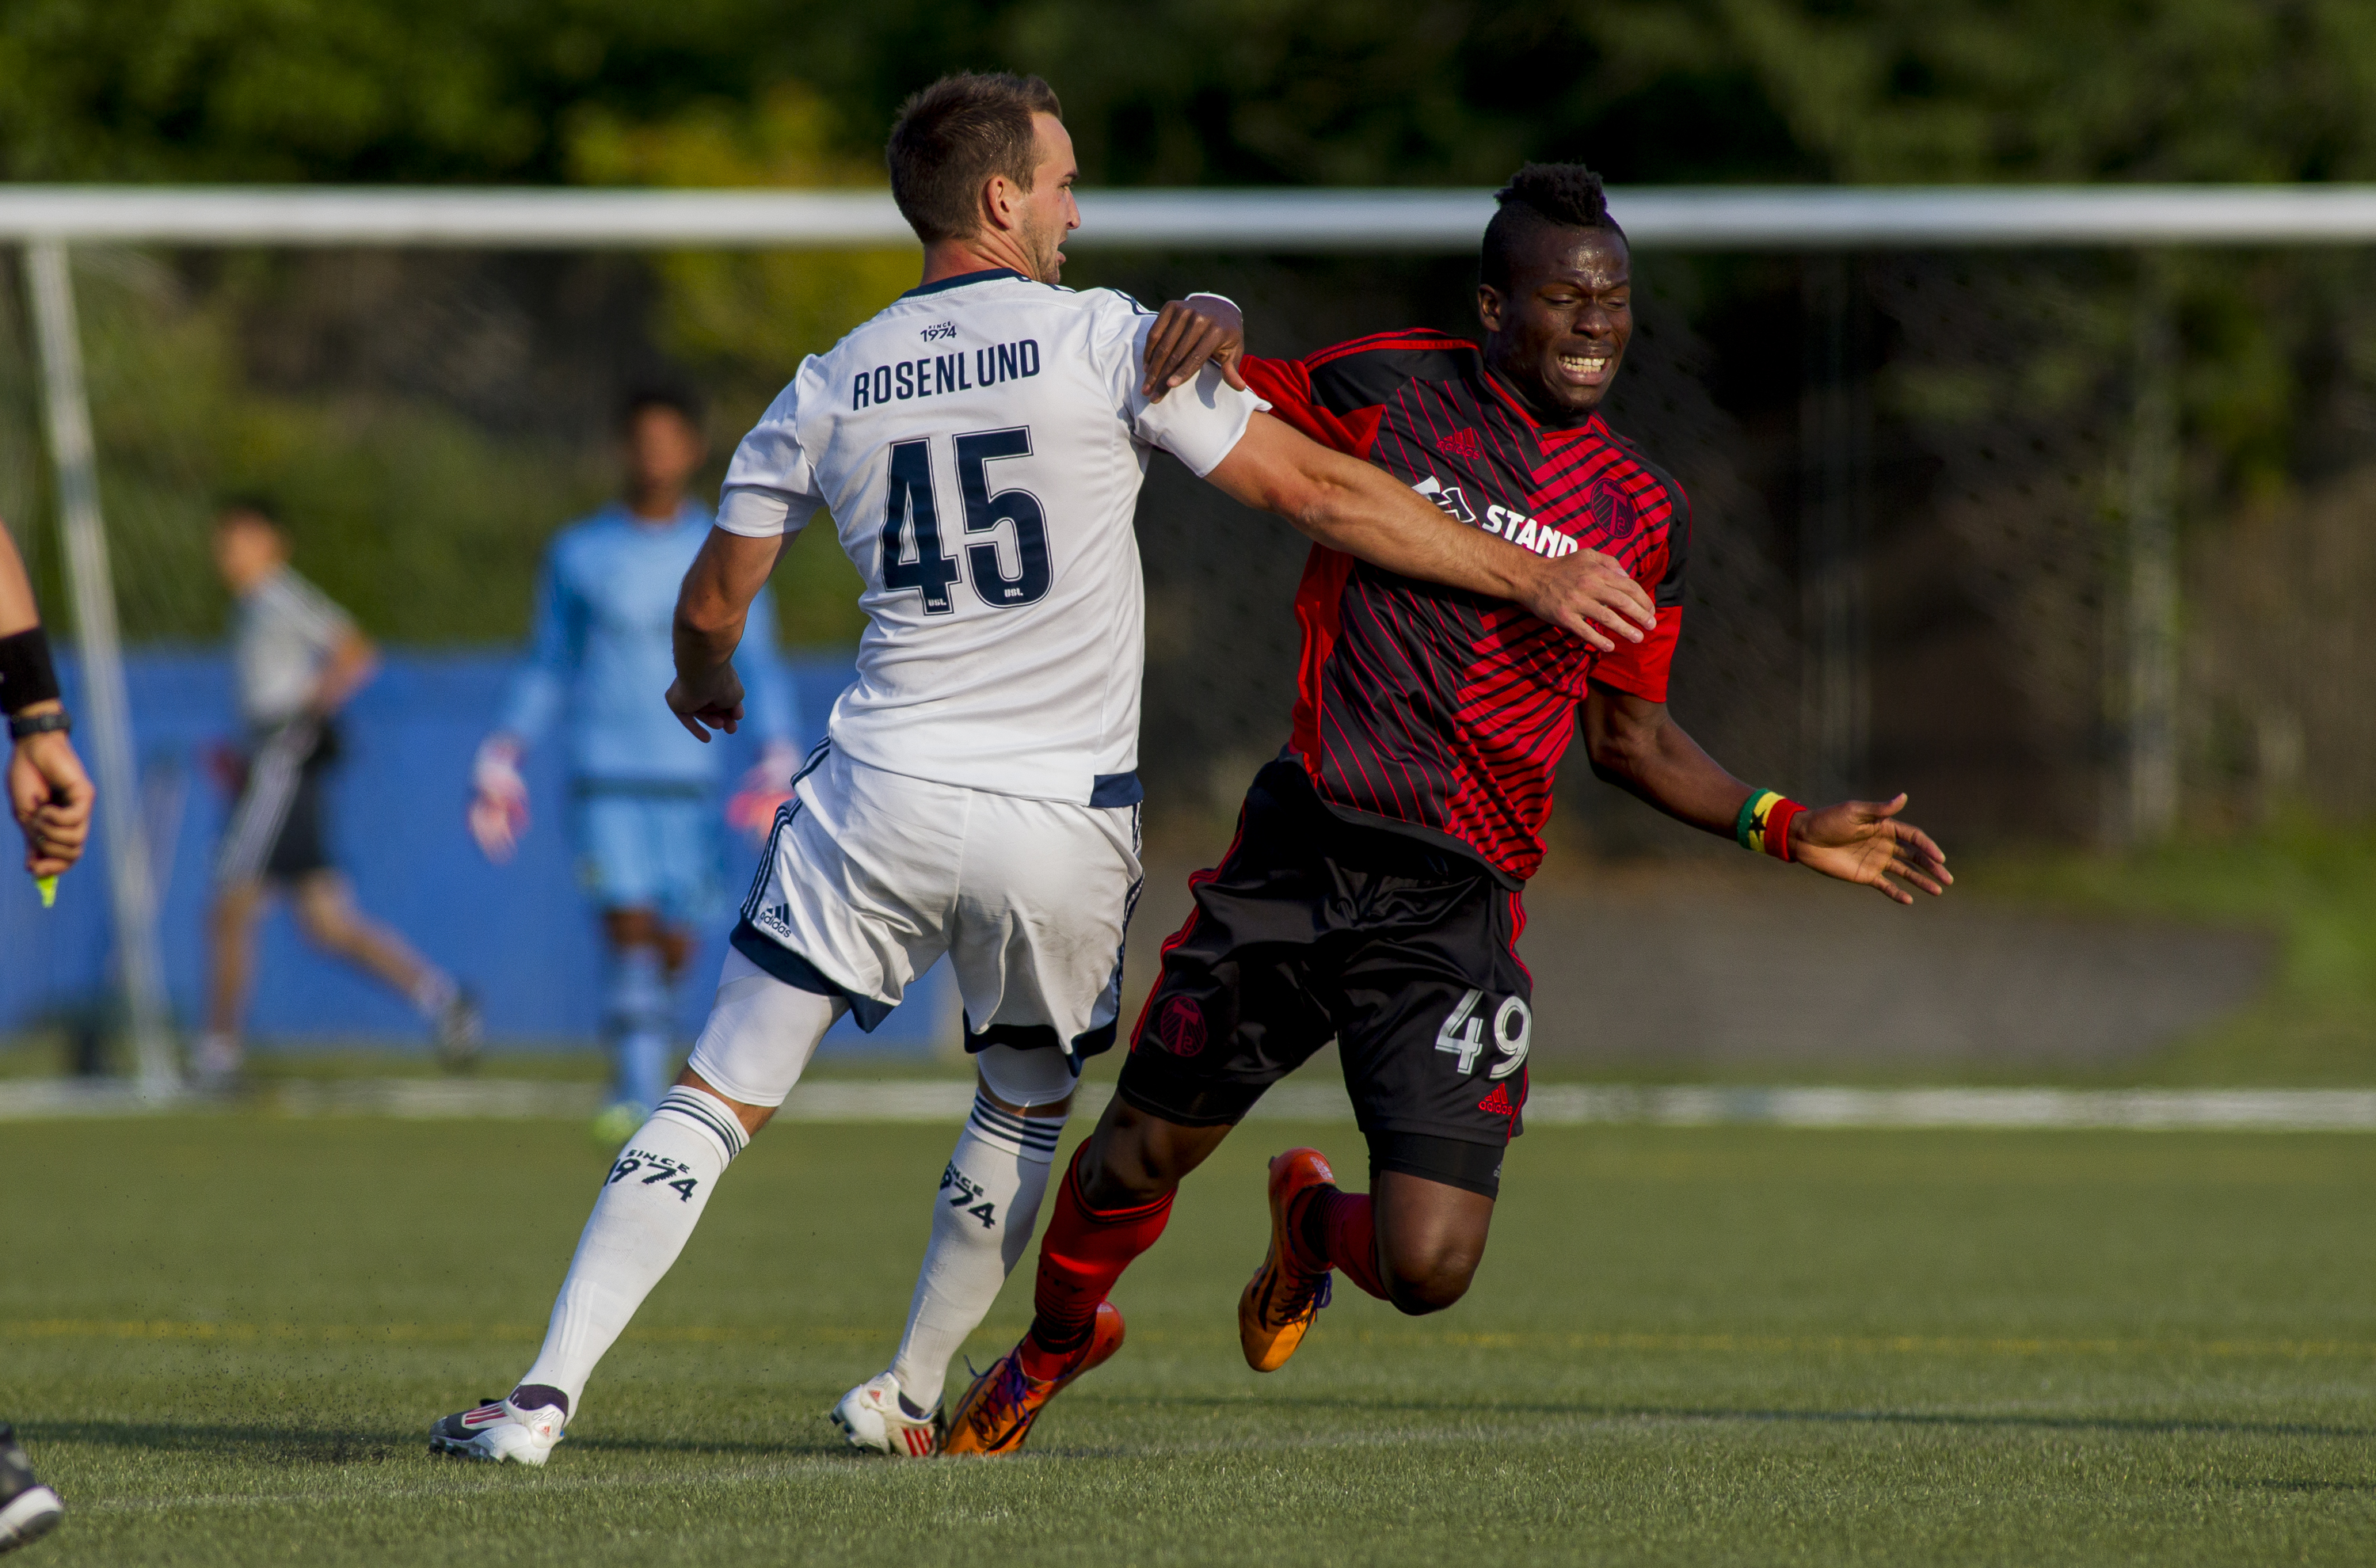 Port Coquitlam's Tyler Rosenlund (L) battles with Portland's Fatawu Safiu during a match on July 10th, 2015 at UBC Thunderbird Stadium.  WFC2 defeated T2 by a score of 2-1.